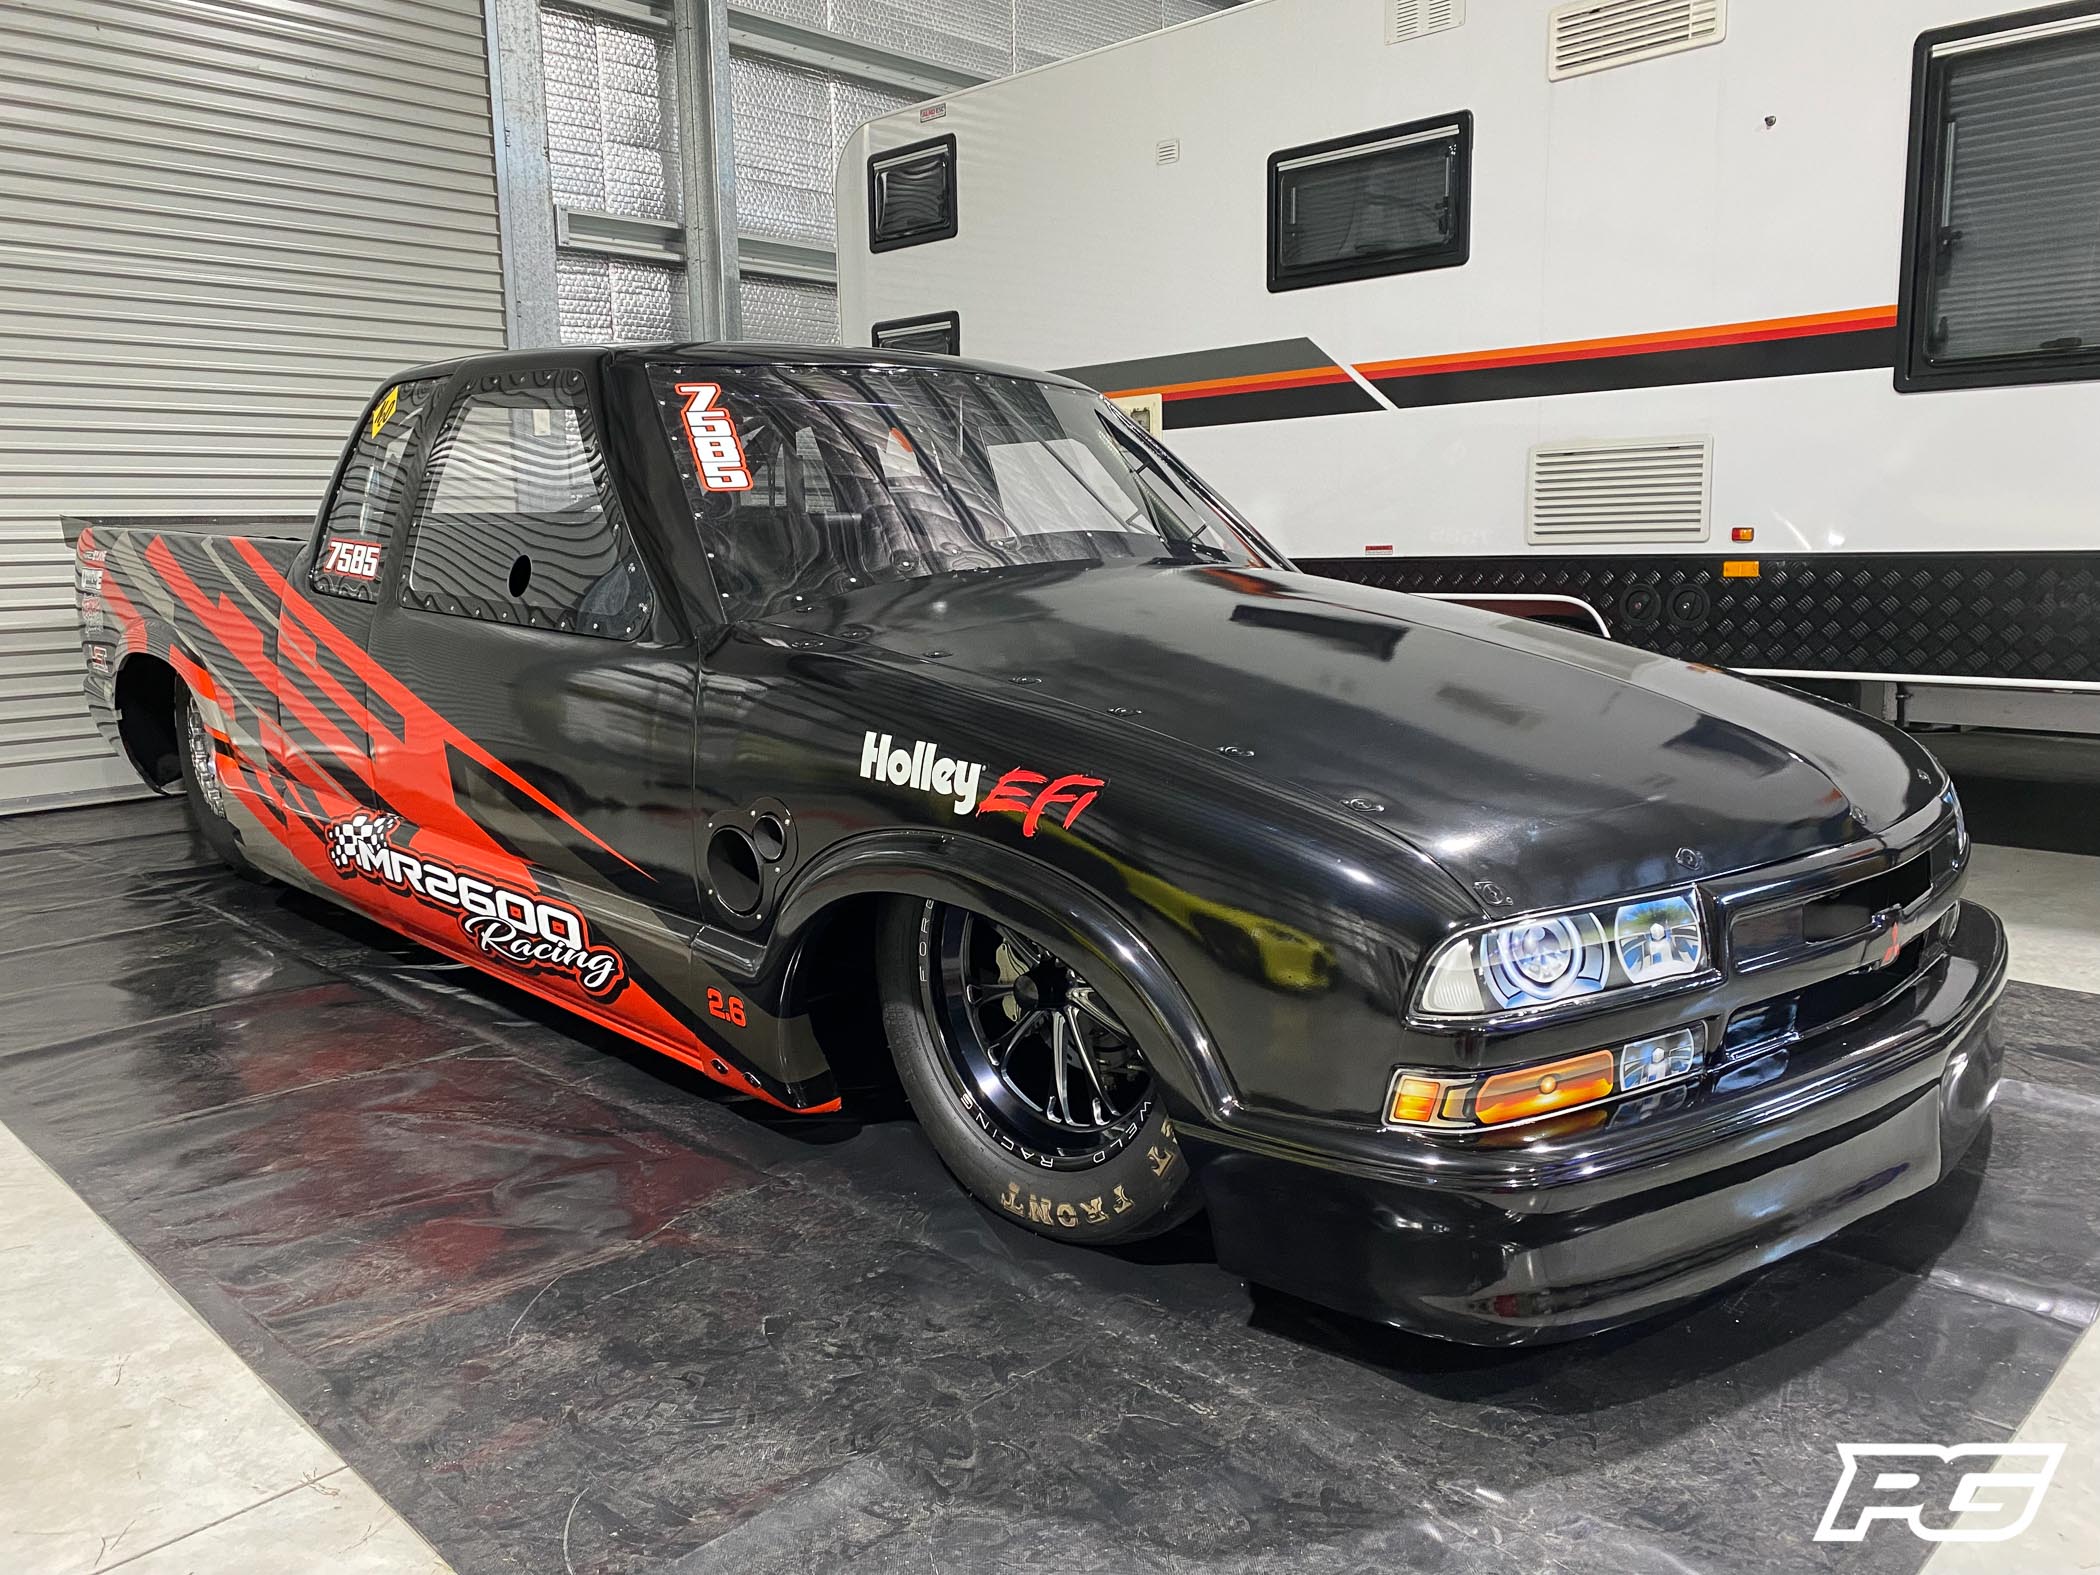 Sigma-powered Chevy S10